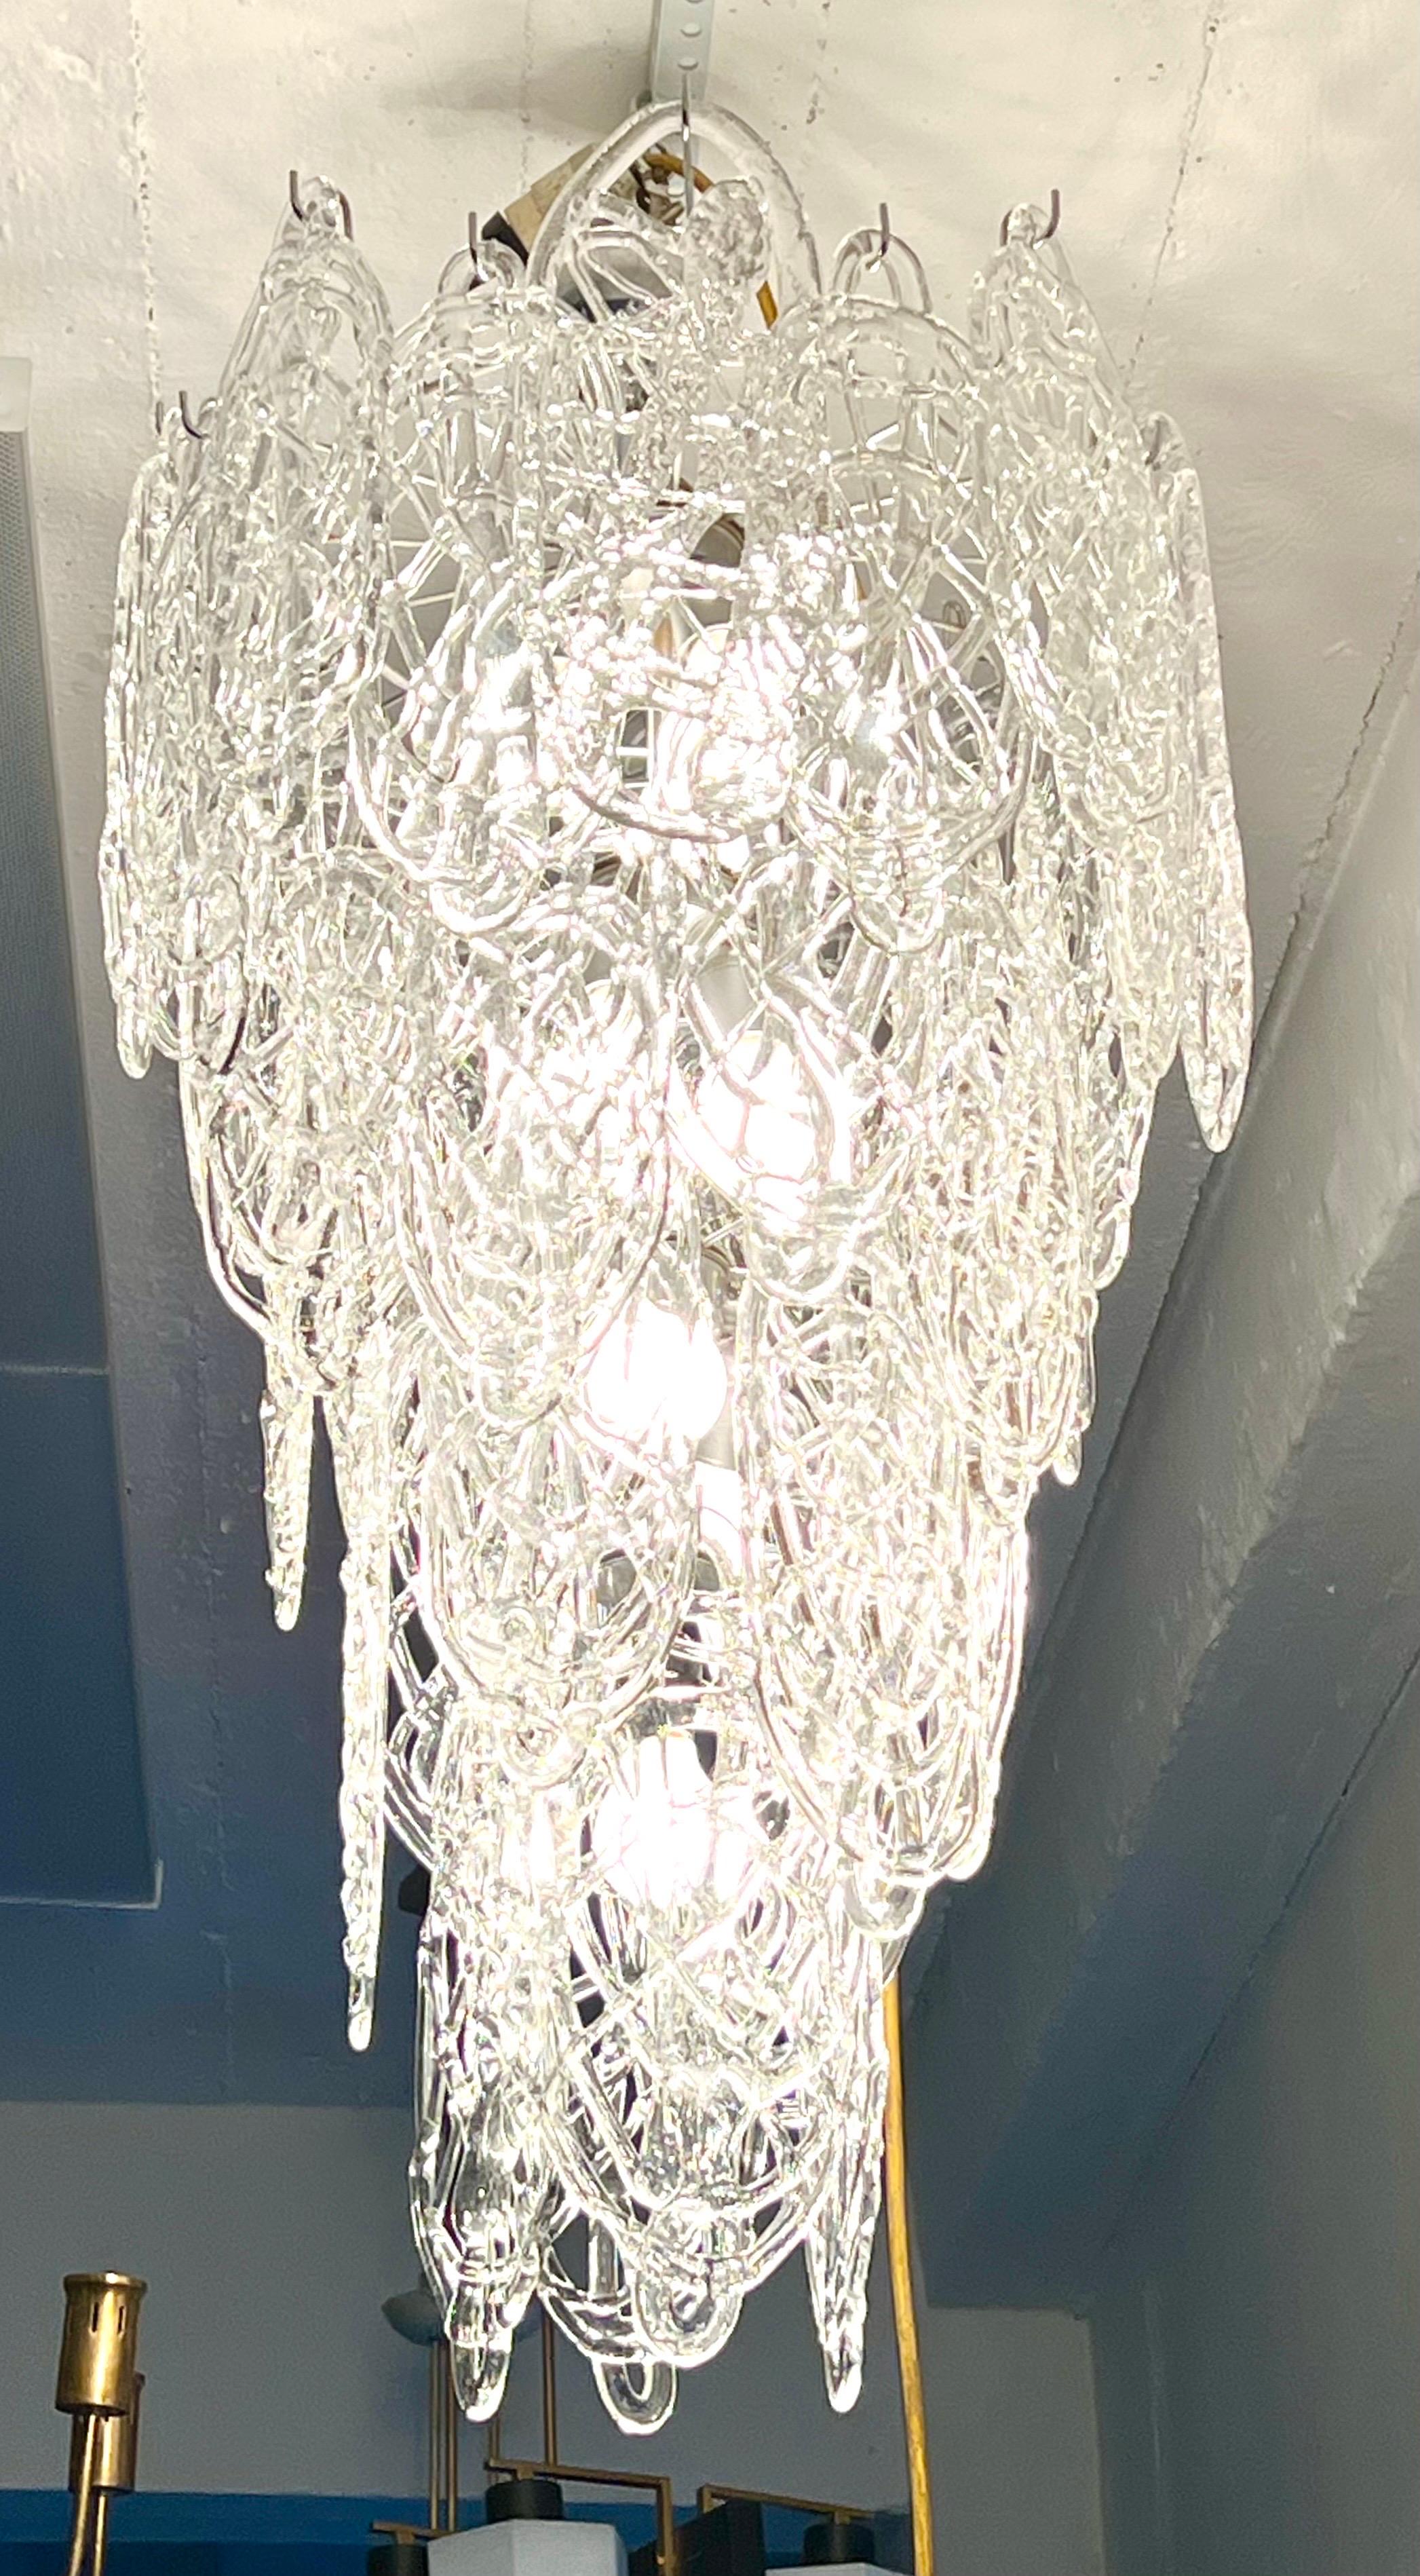 2 Grand Italian Midcentury Modern Cascading Clear Murano Glass Chandeliers 1970  For Sale 1